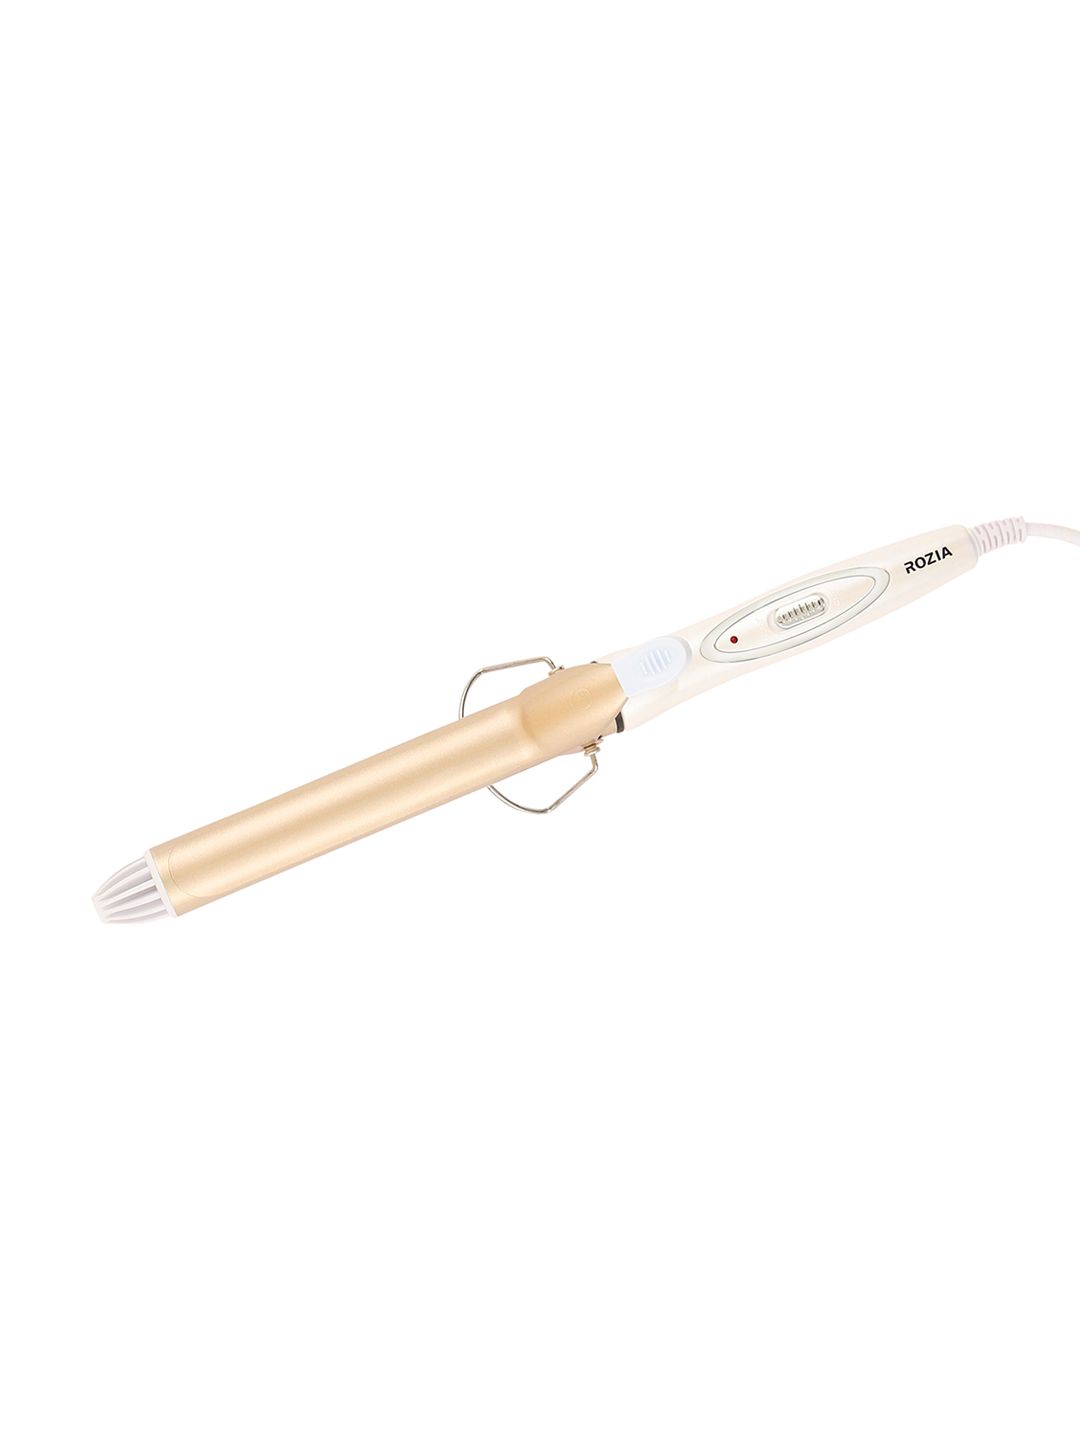 Rozia White Hair Curling Tong with Temperature Display HR721 Price in India